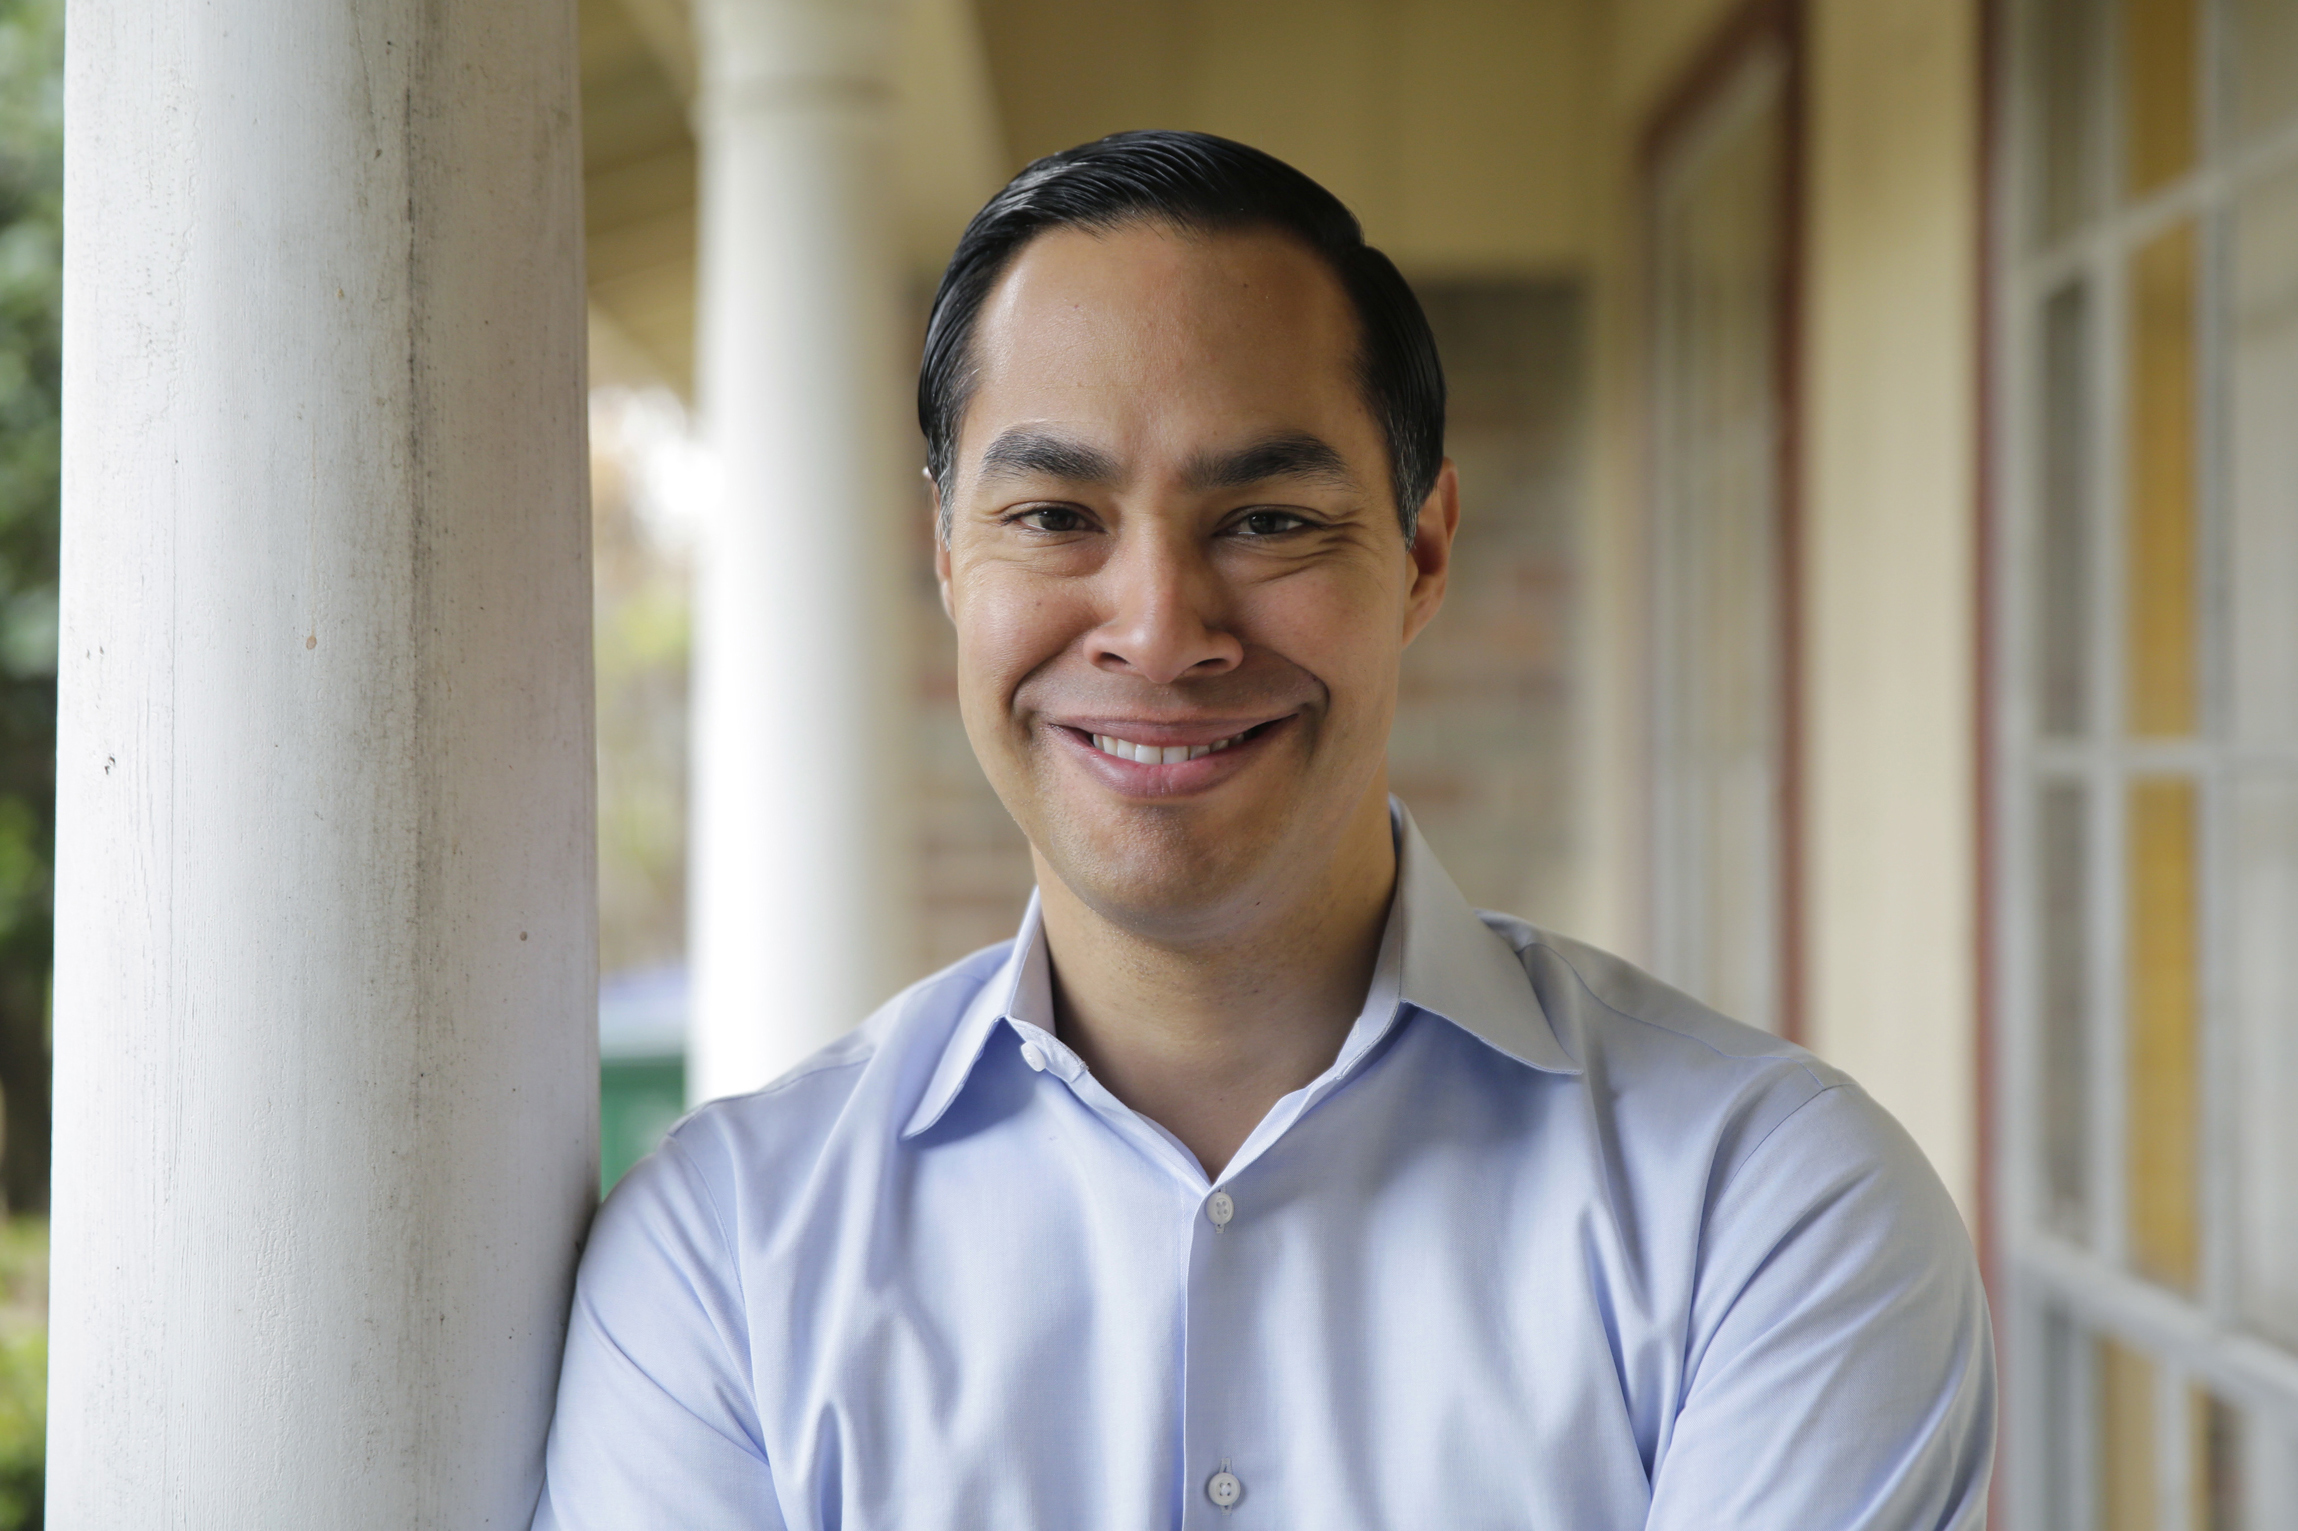 Democrat Julian Castro poses for a photo at his home in San Antonio on Tuesday.